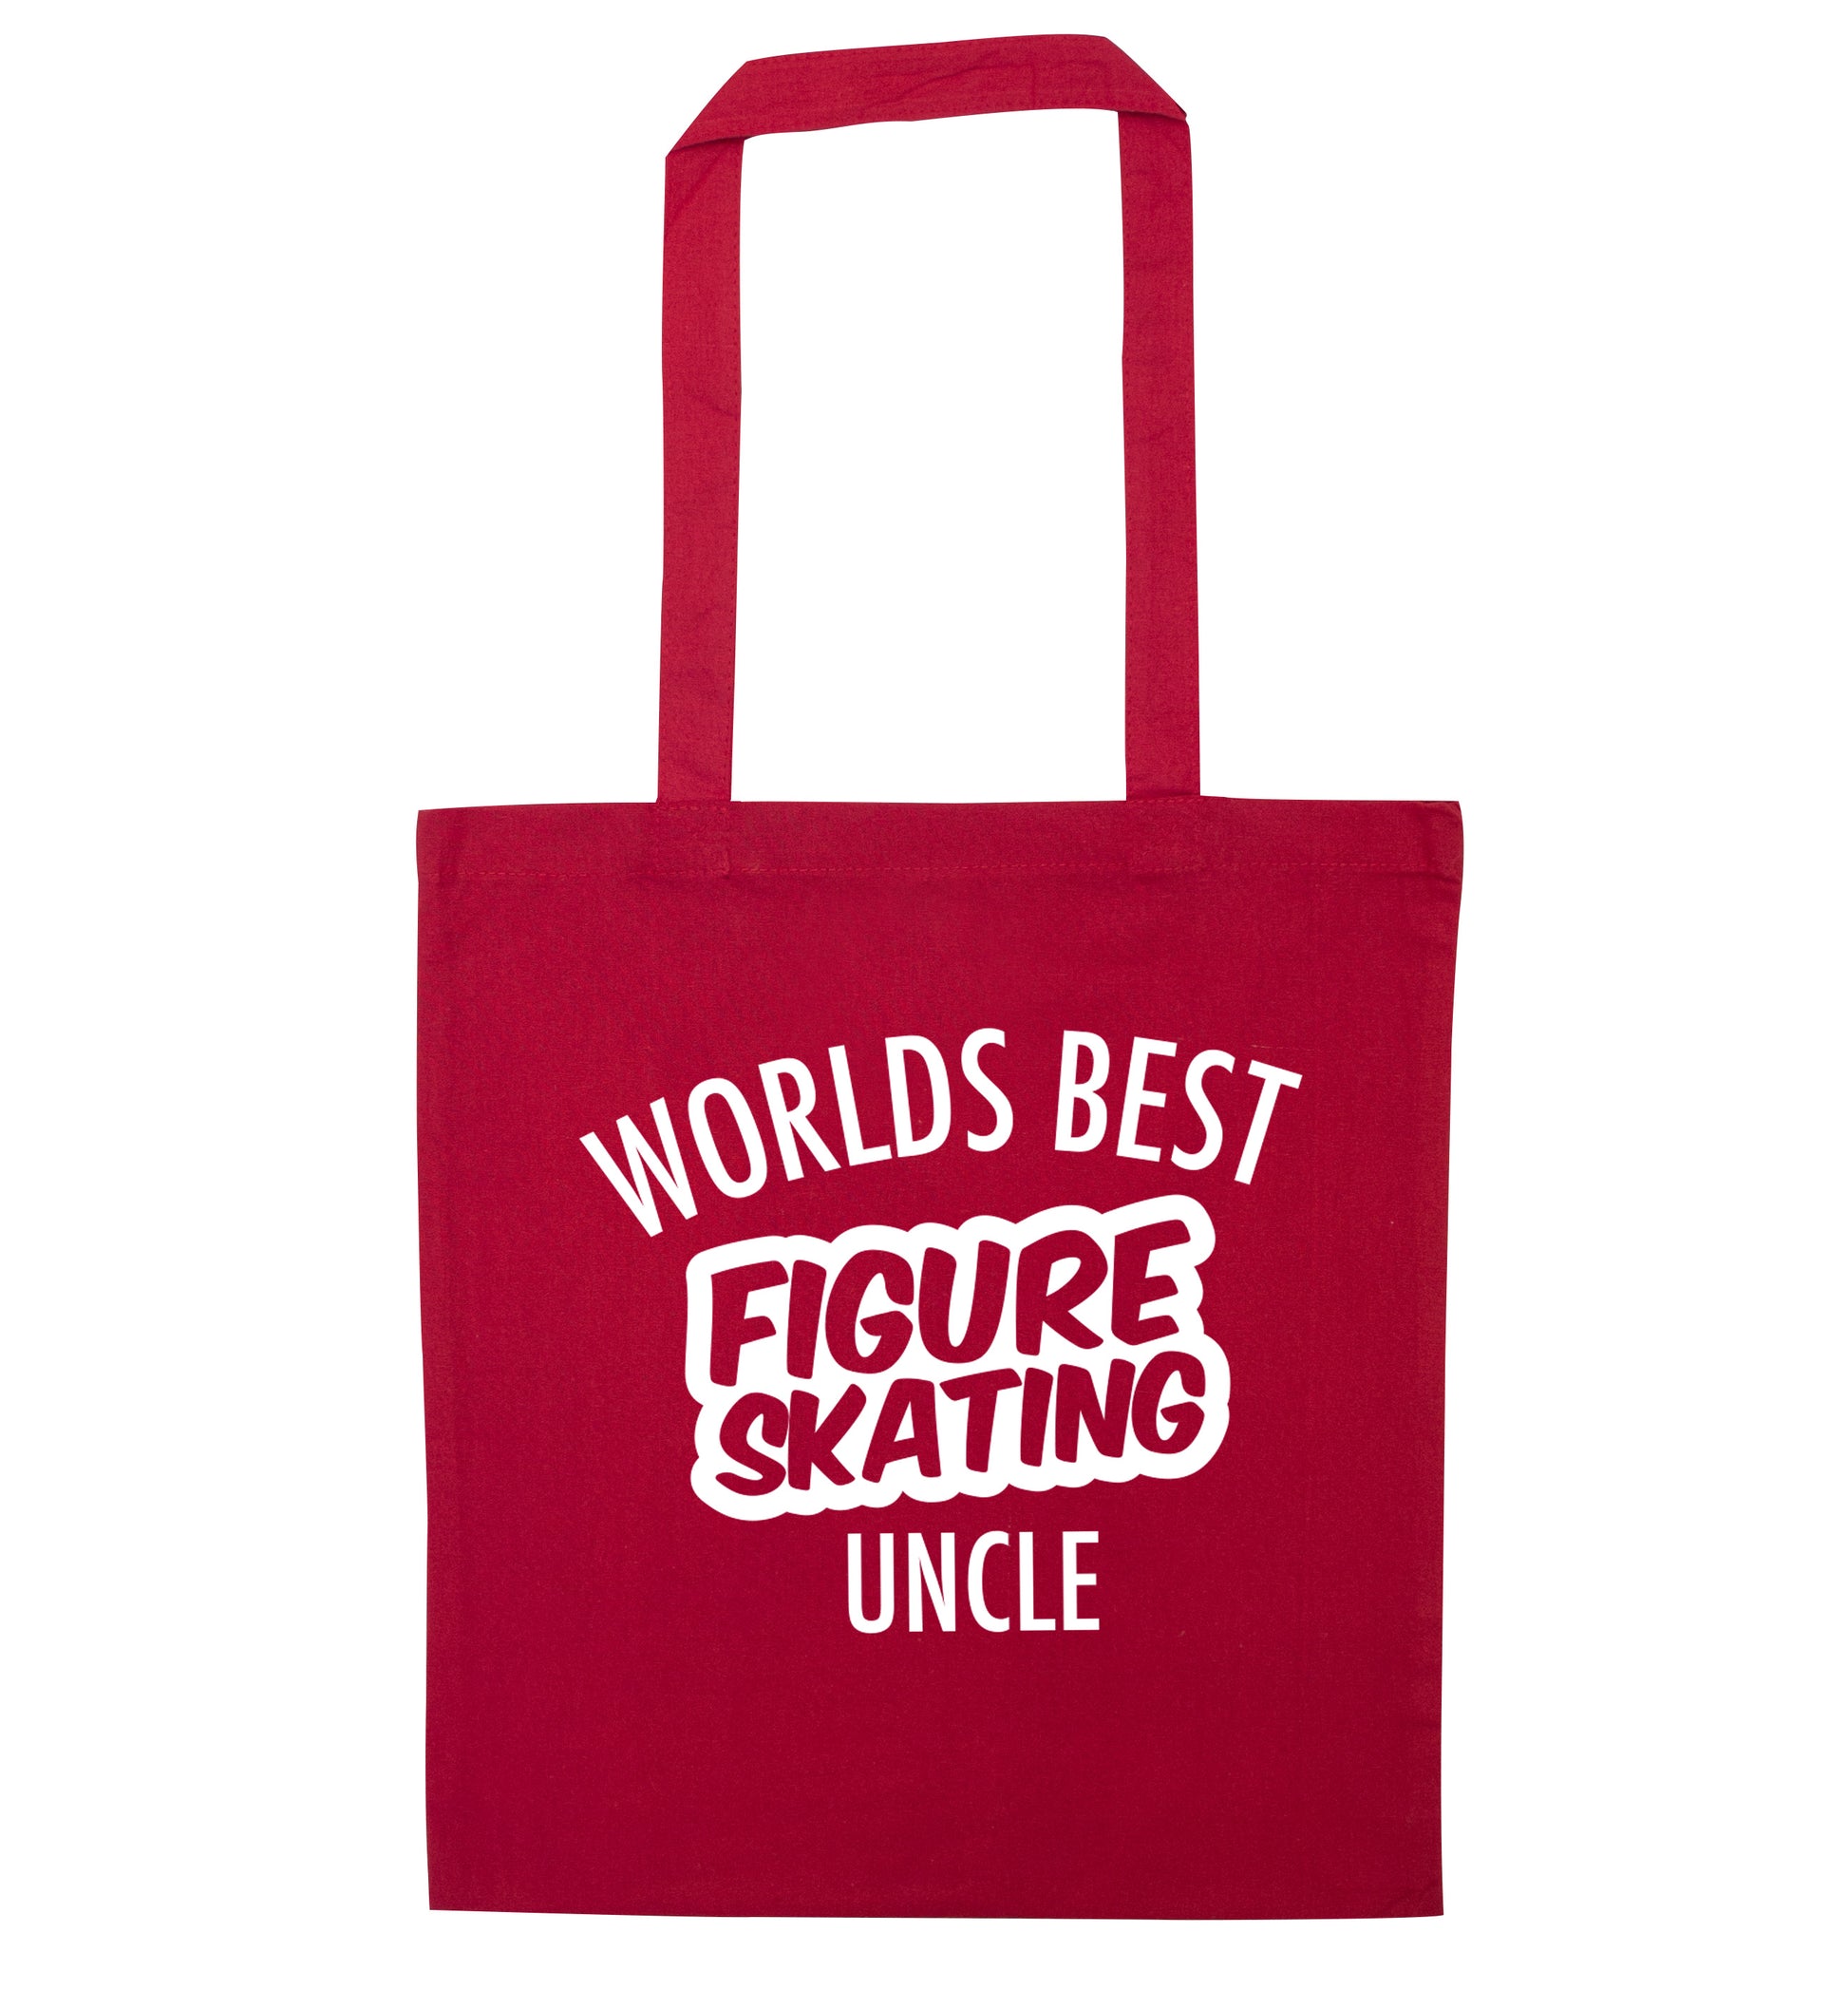 Worlds best figure skating uncle red tote bag